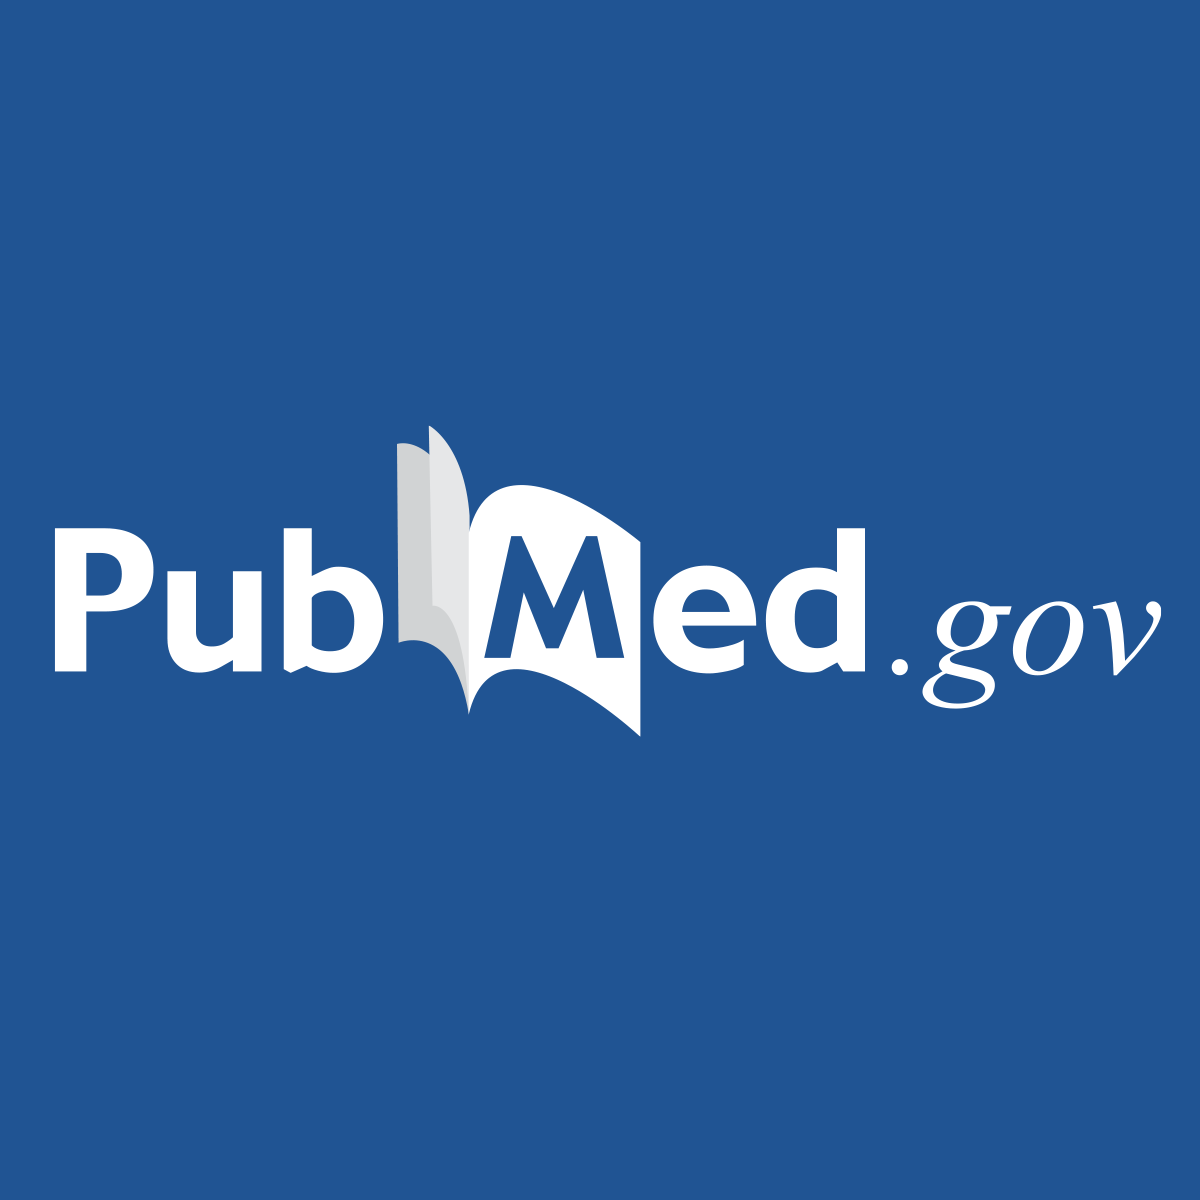 High anal swab viral load predisposes adverse clinical outcomes in severe COVID-19 patients - PubMed